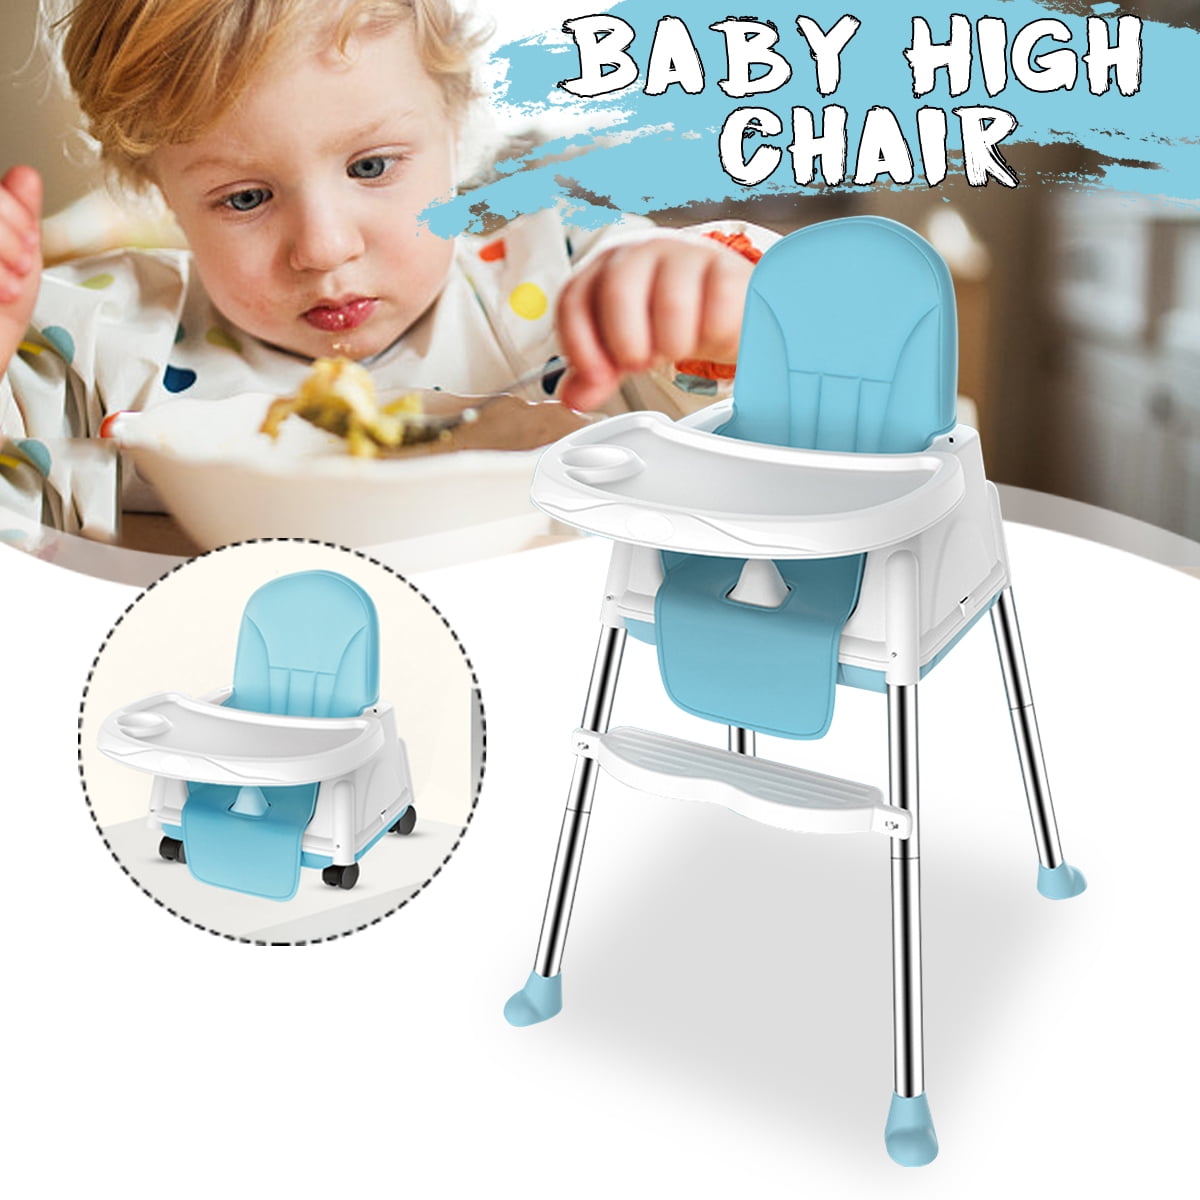 3-IN-1 Multi-Function Adjustable Baby High Chair Infant Toddler Feeding Booster Seat Folding with Adjustable Tray &amp; Leg For 6 months-5 years old Baby Playing Dining Chair